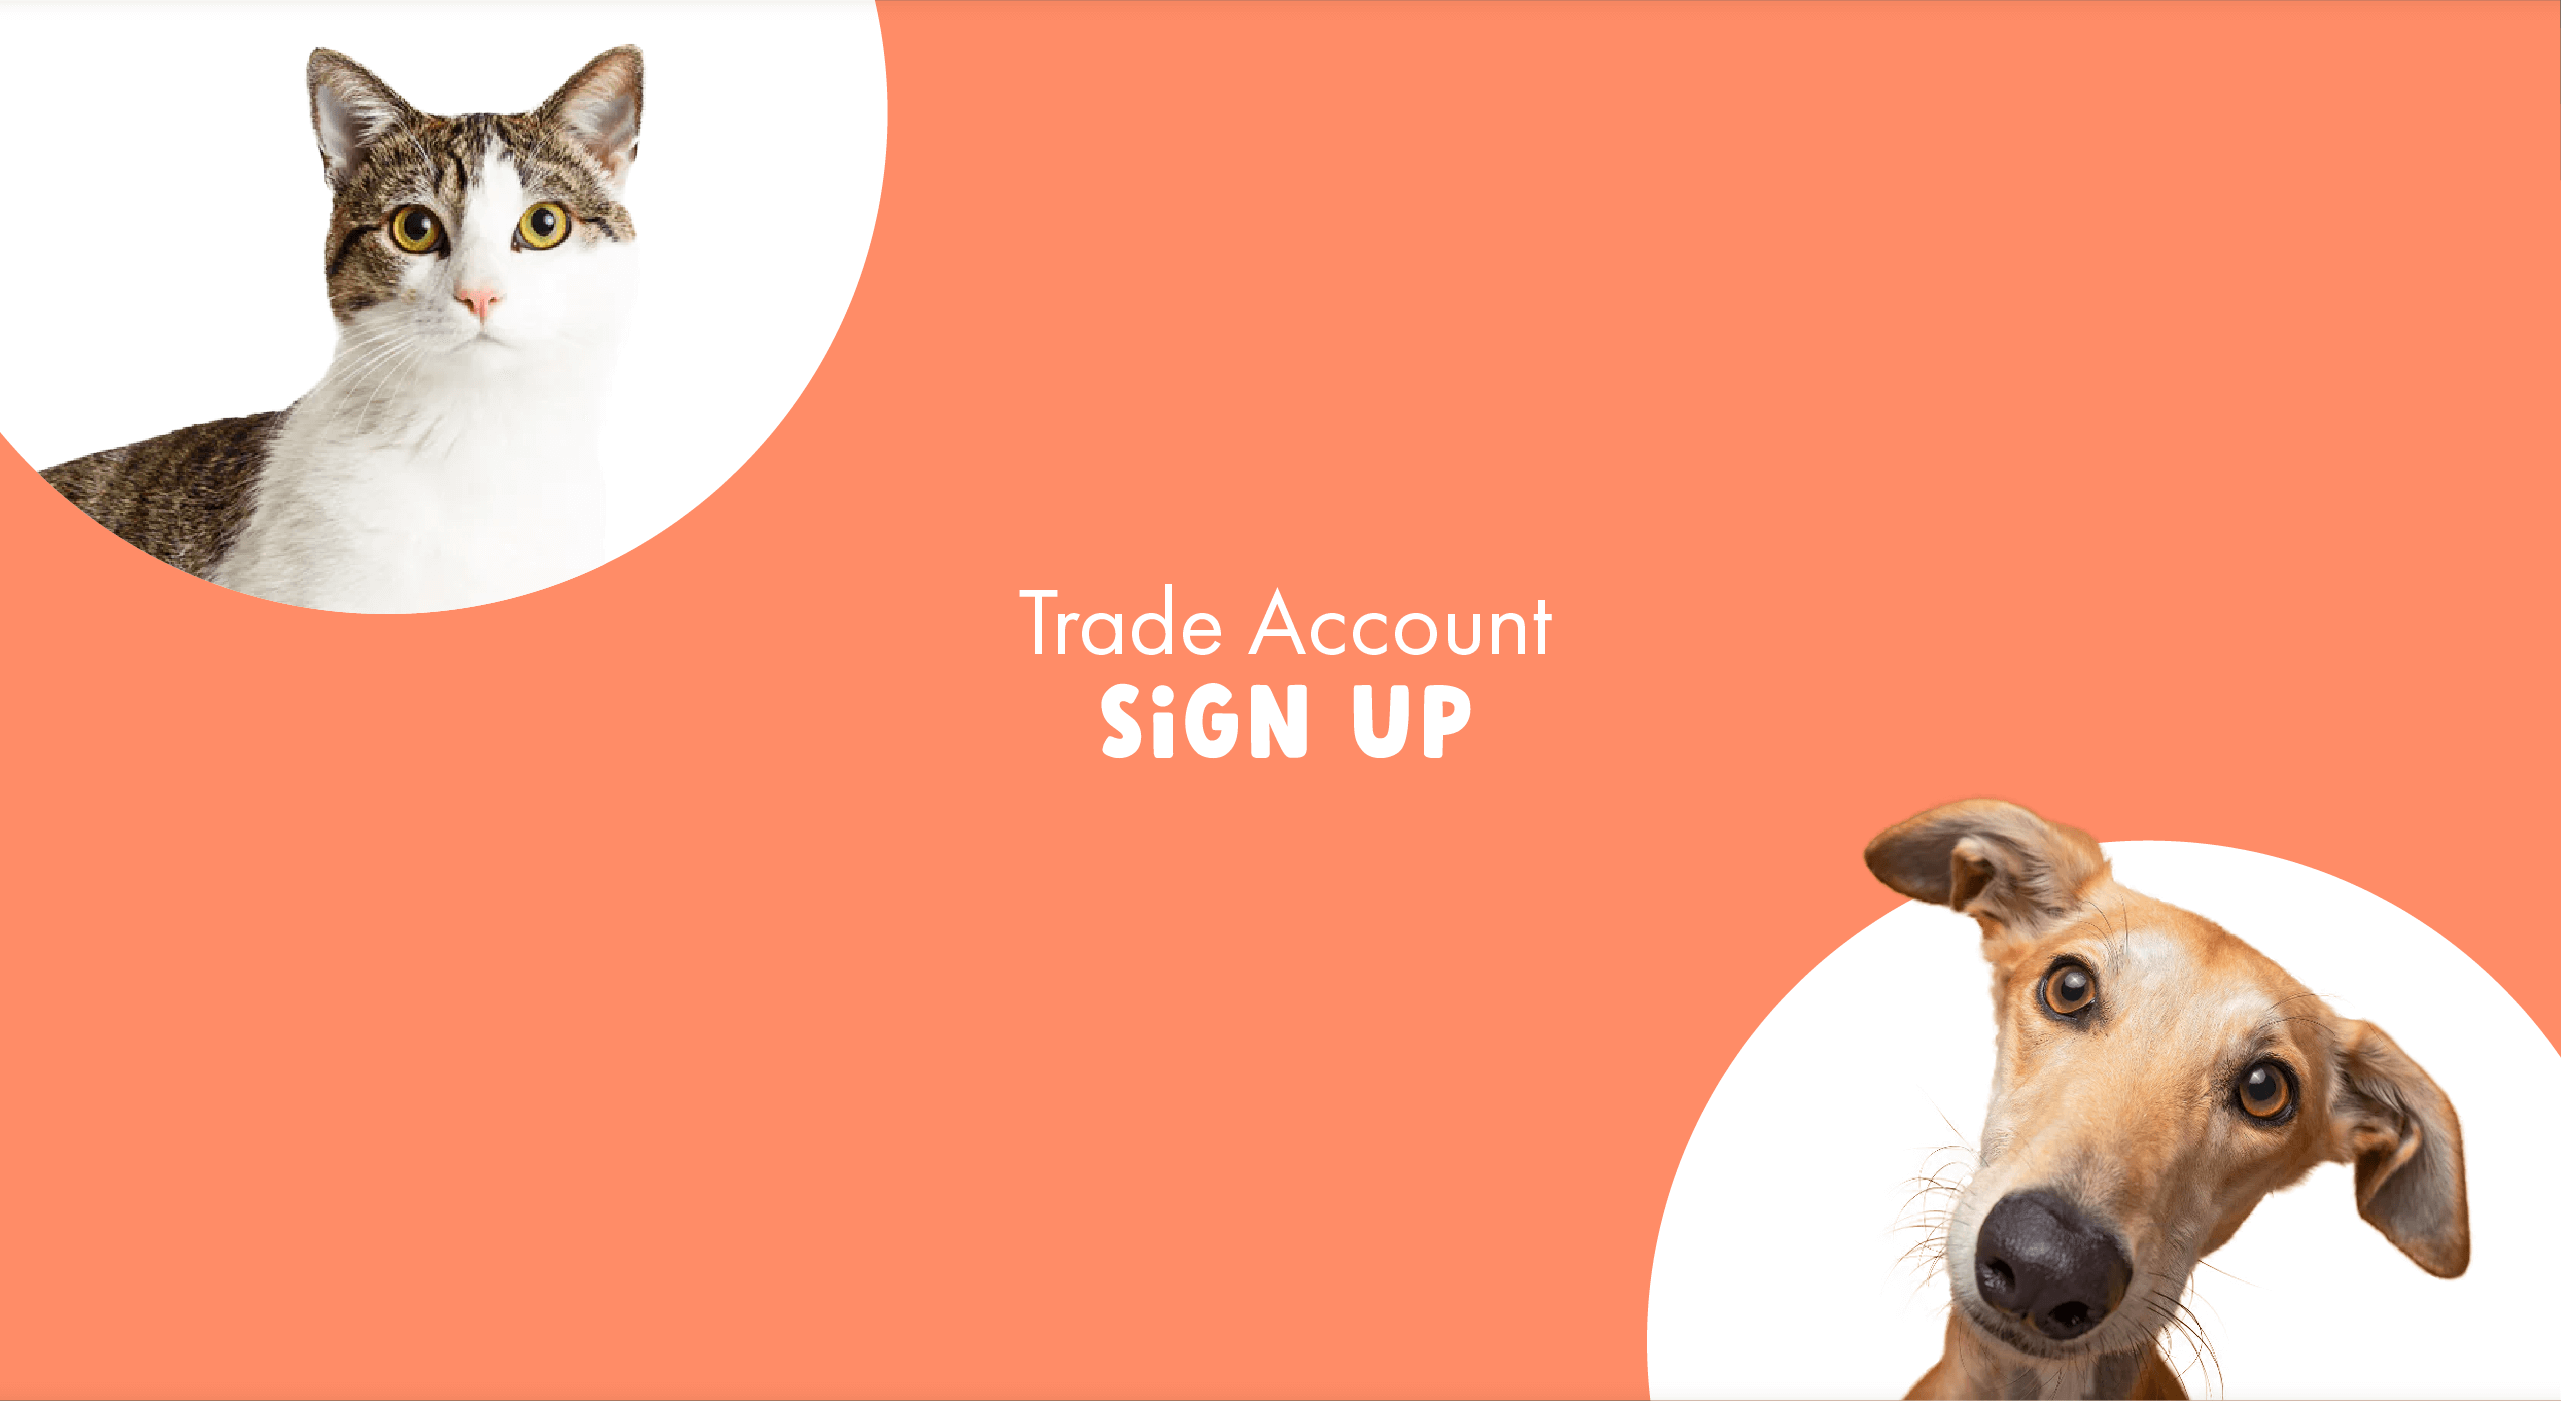 Trade account with DotDotPet